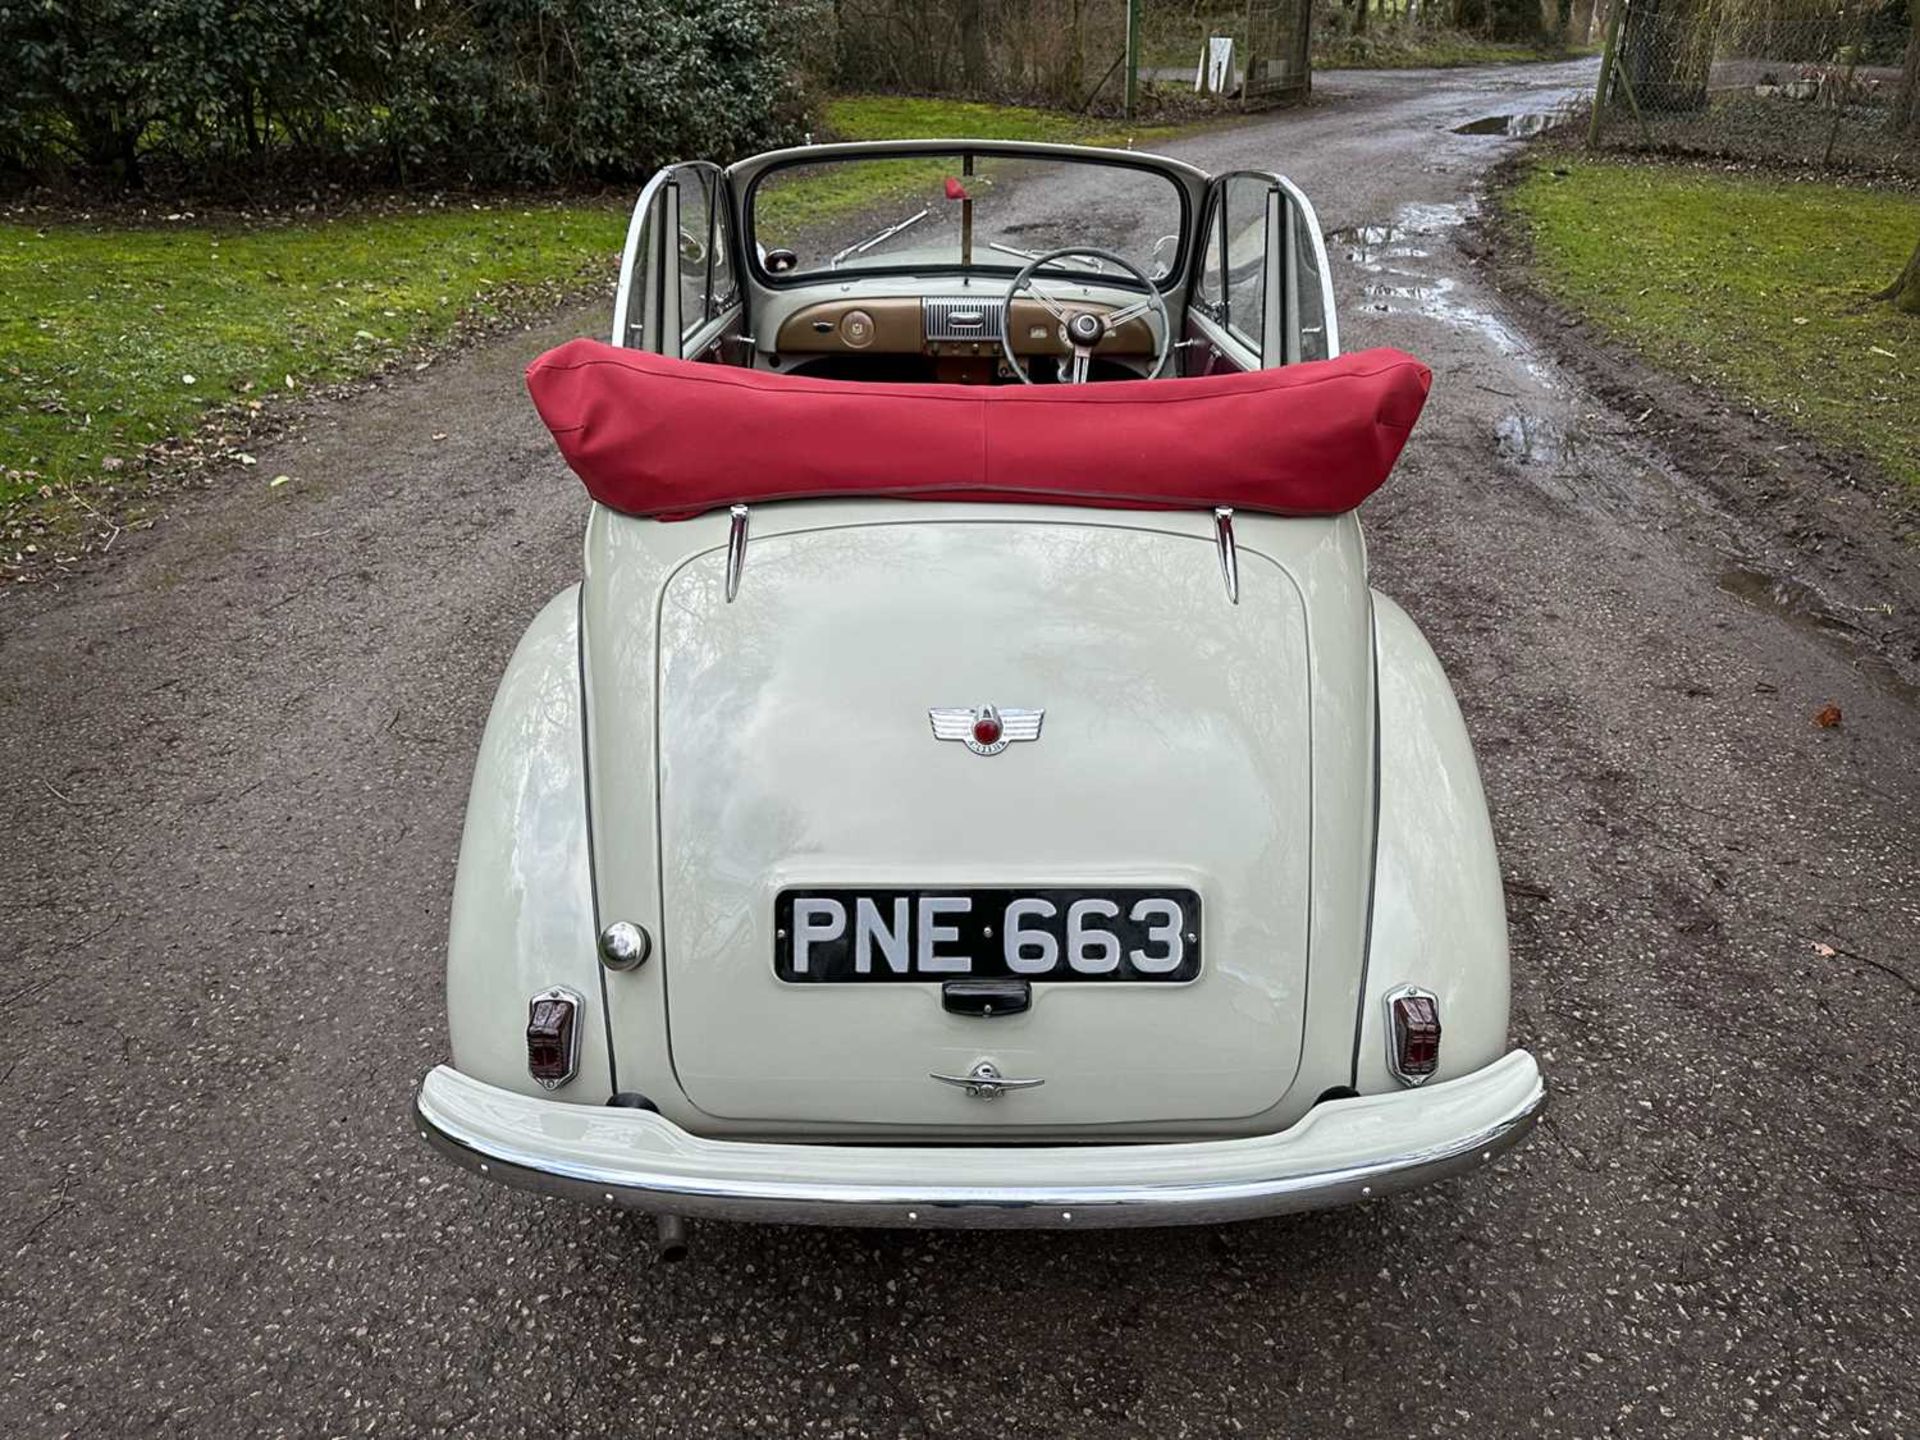 1954 Morris Minor Tourer Fully restored to concours standard - Image 21 of 100